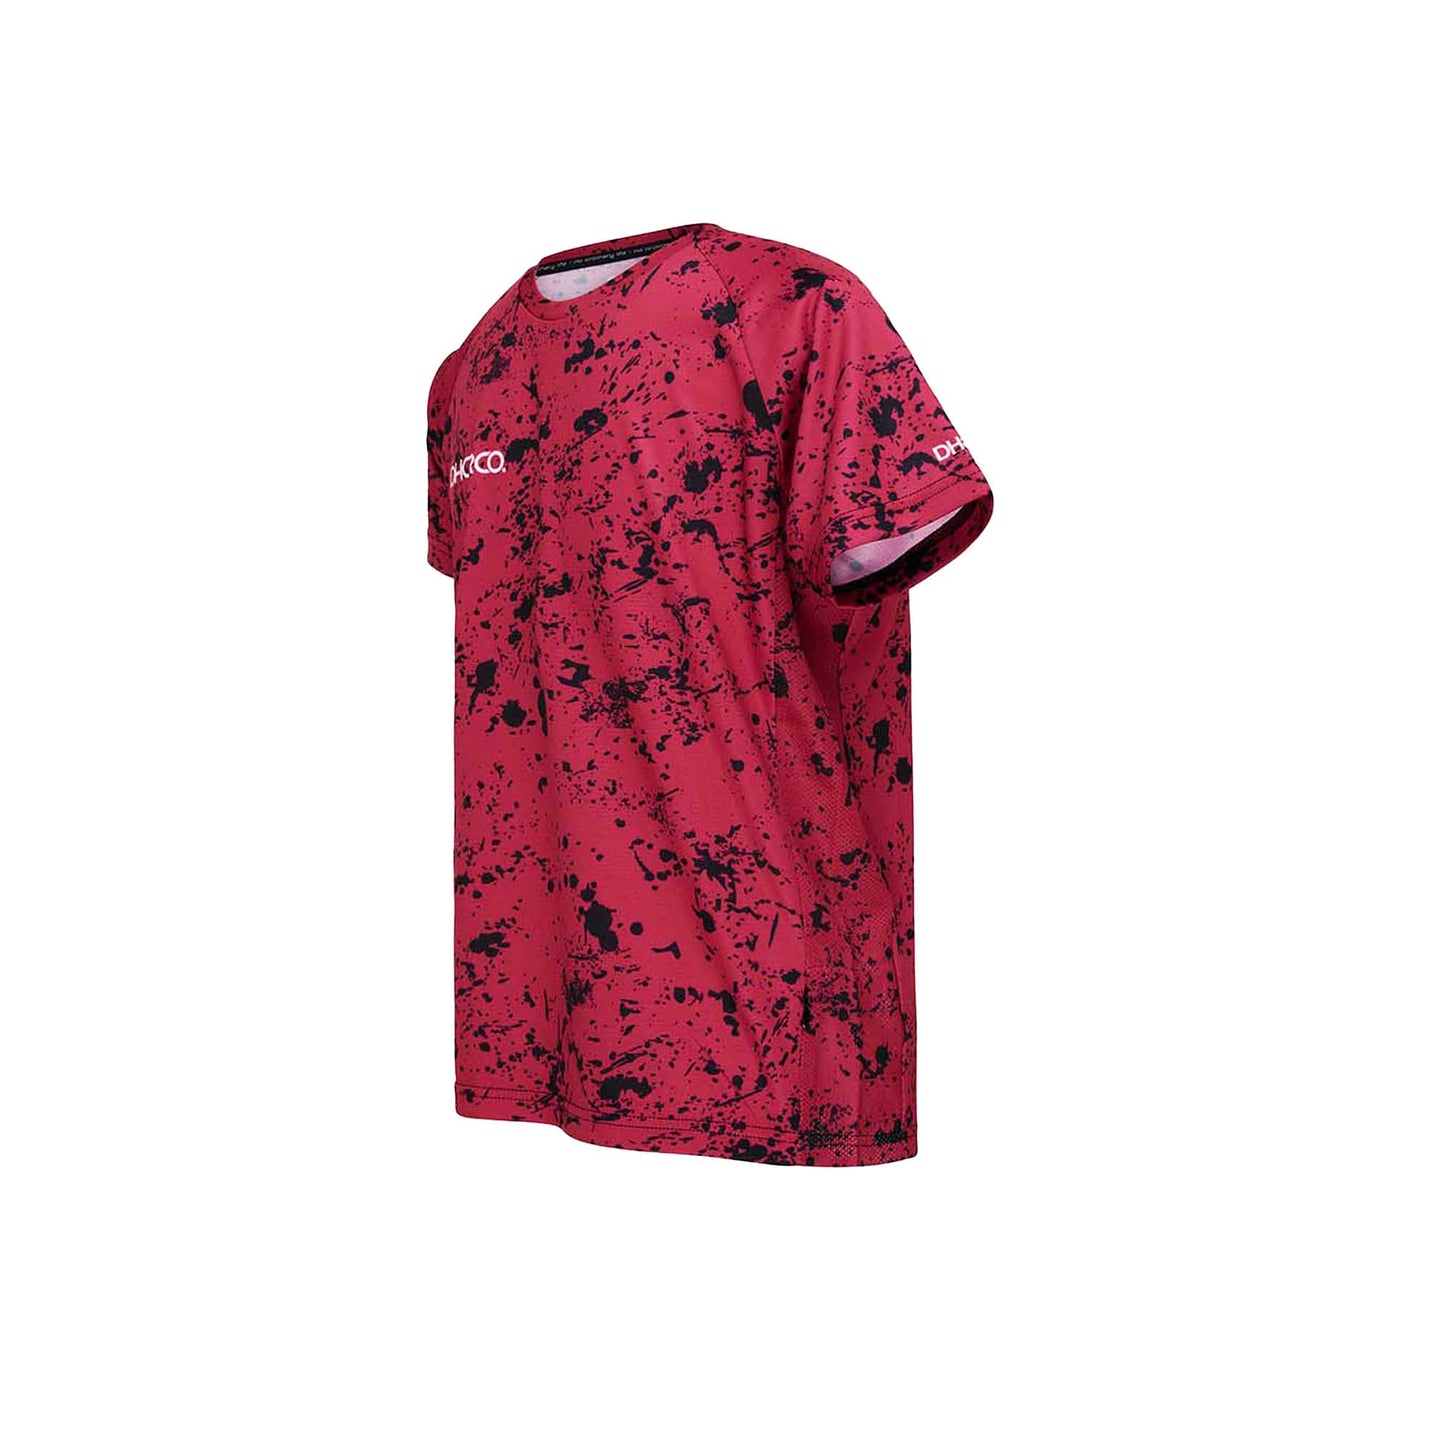 DHaRCO Men's Short Sleeve Jersey - L - Chili Peppers